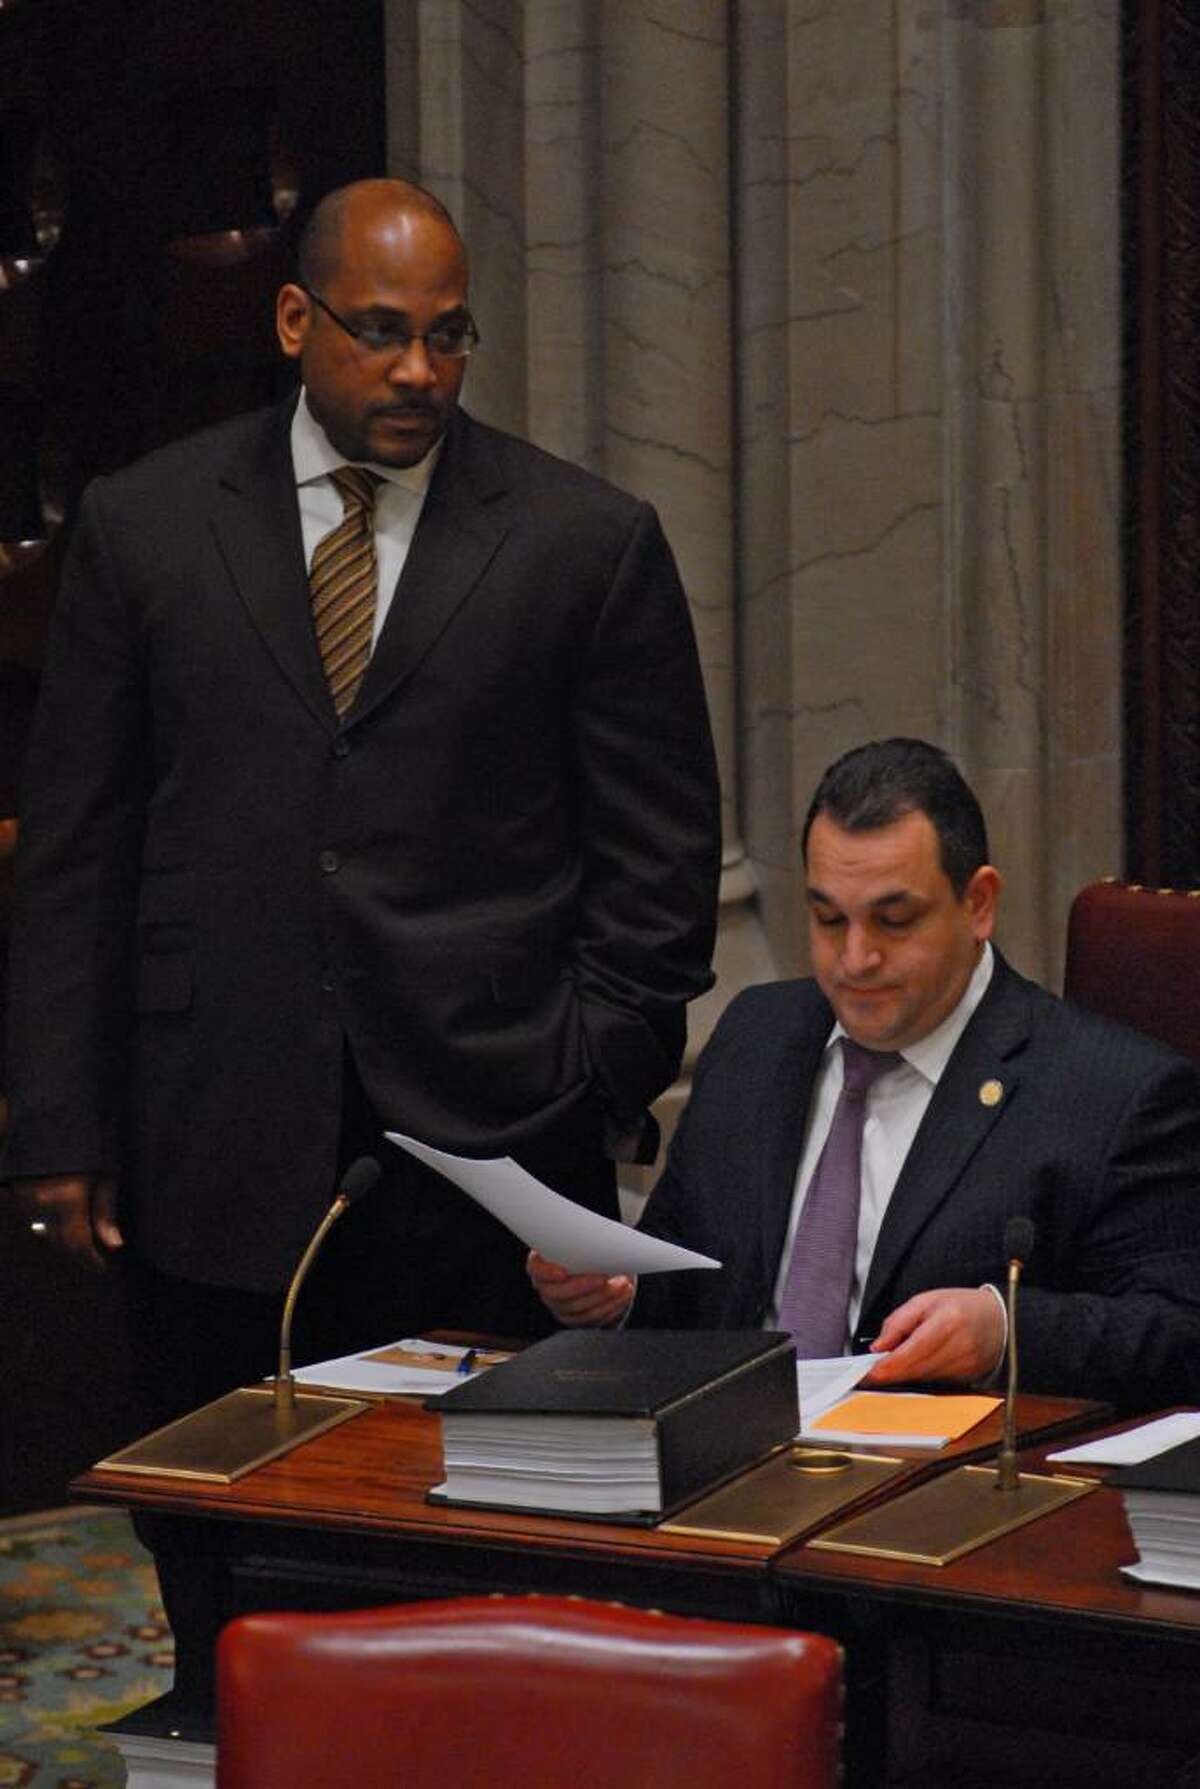 John L. Sampson, Democratic Conference Leader of the New York State Senate, left, stands next to fellow Democrat, State Senator Hiram Monserrate, right, while the Senate was gavelled into session for a short time Monday afternoon in the Capitol in Albany, NY, November 16, 2009. (Philip Kamrass / Times Union)